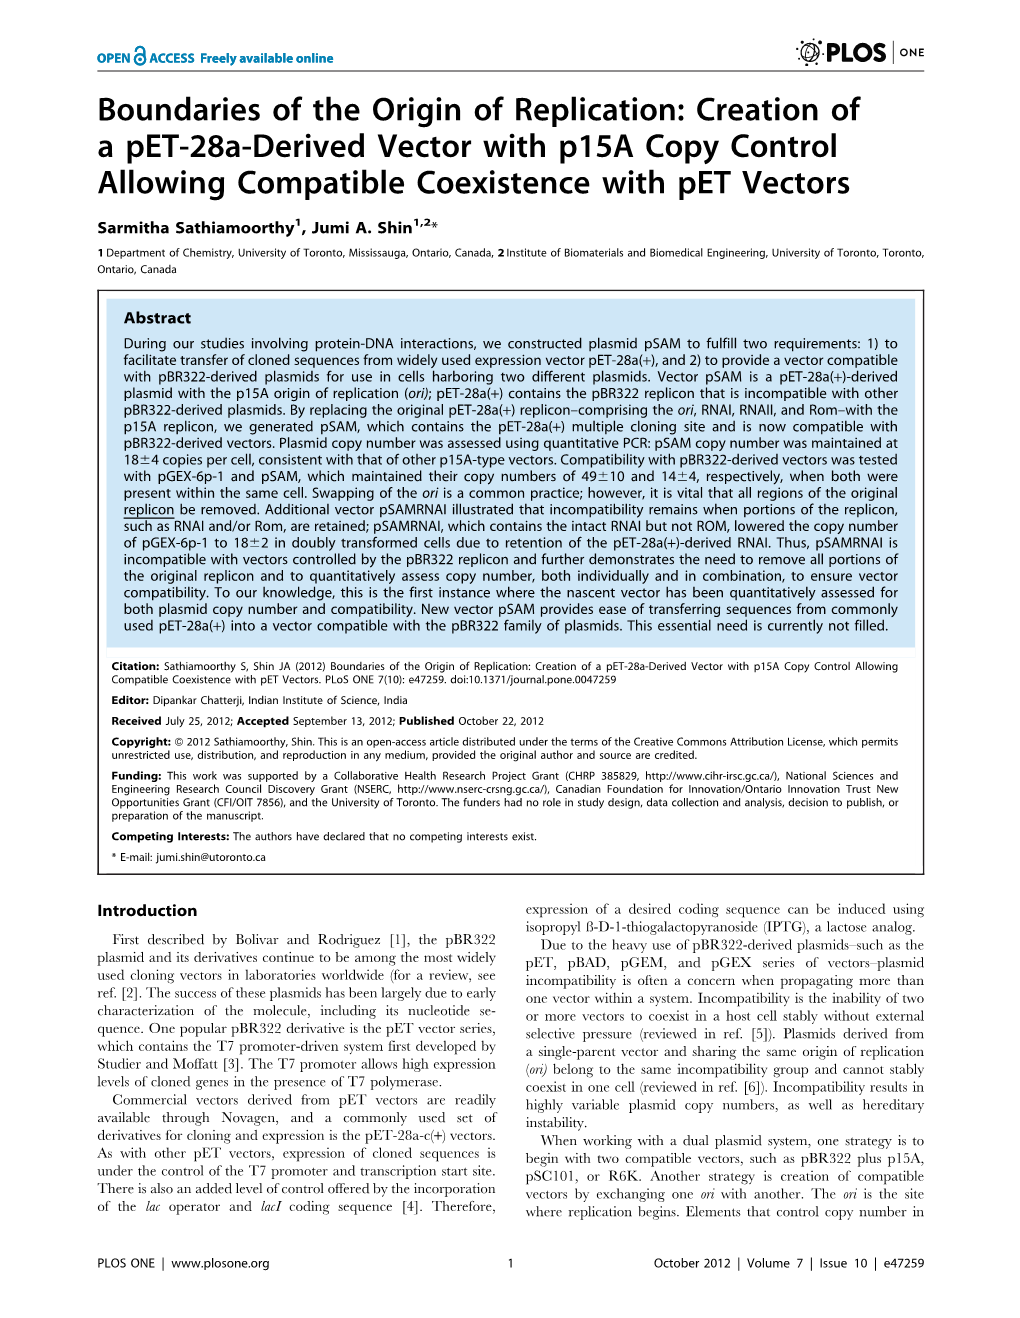 Creation of a Pet-28A-Derived Vector with P15a Copy Control Allowing Compatible Coexistence with Pet Vectors